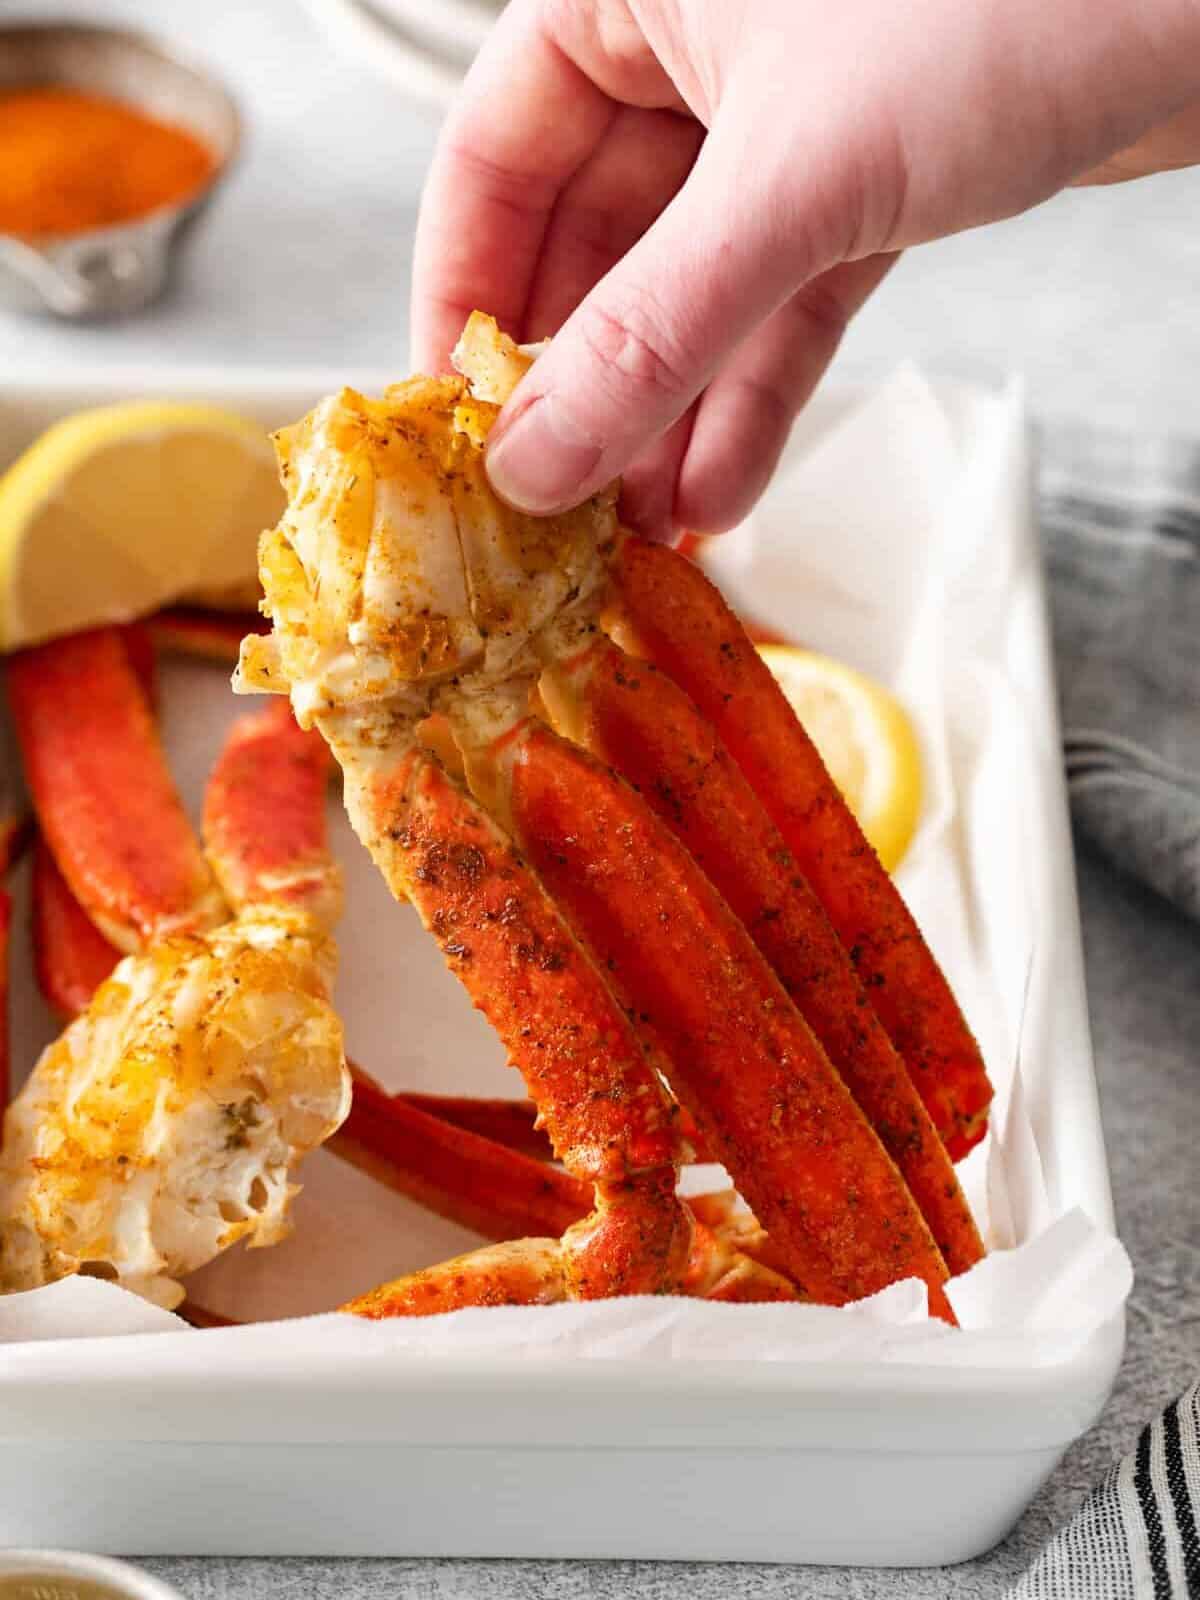 three-quarters view of a hand holding up a cluster of crab legs from a white rectangular plate.